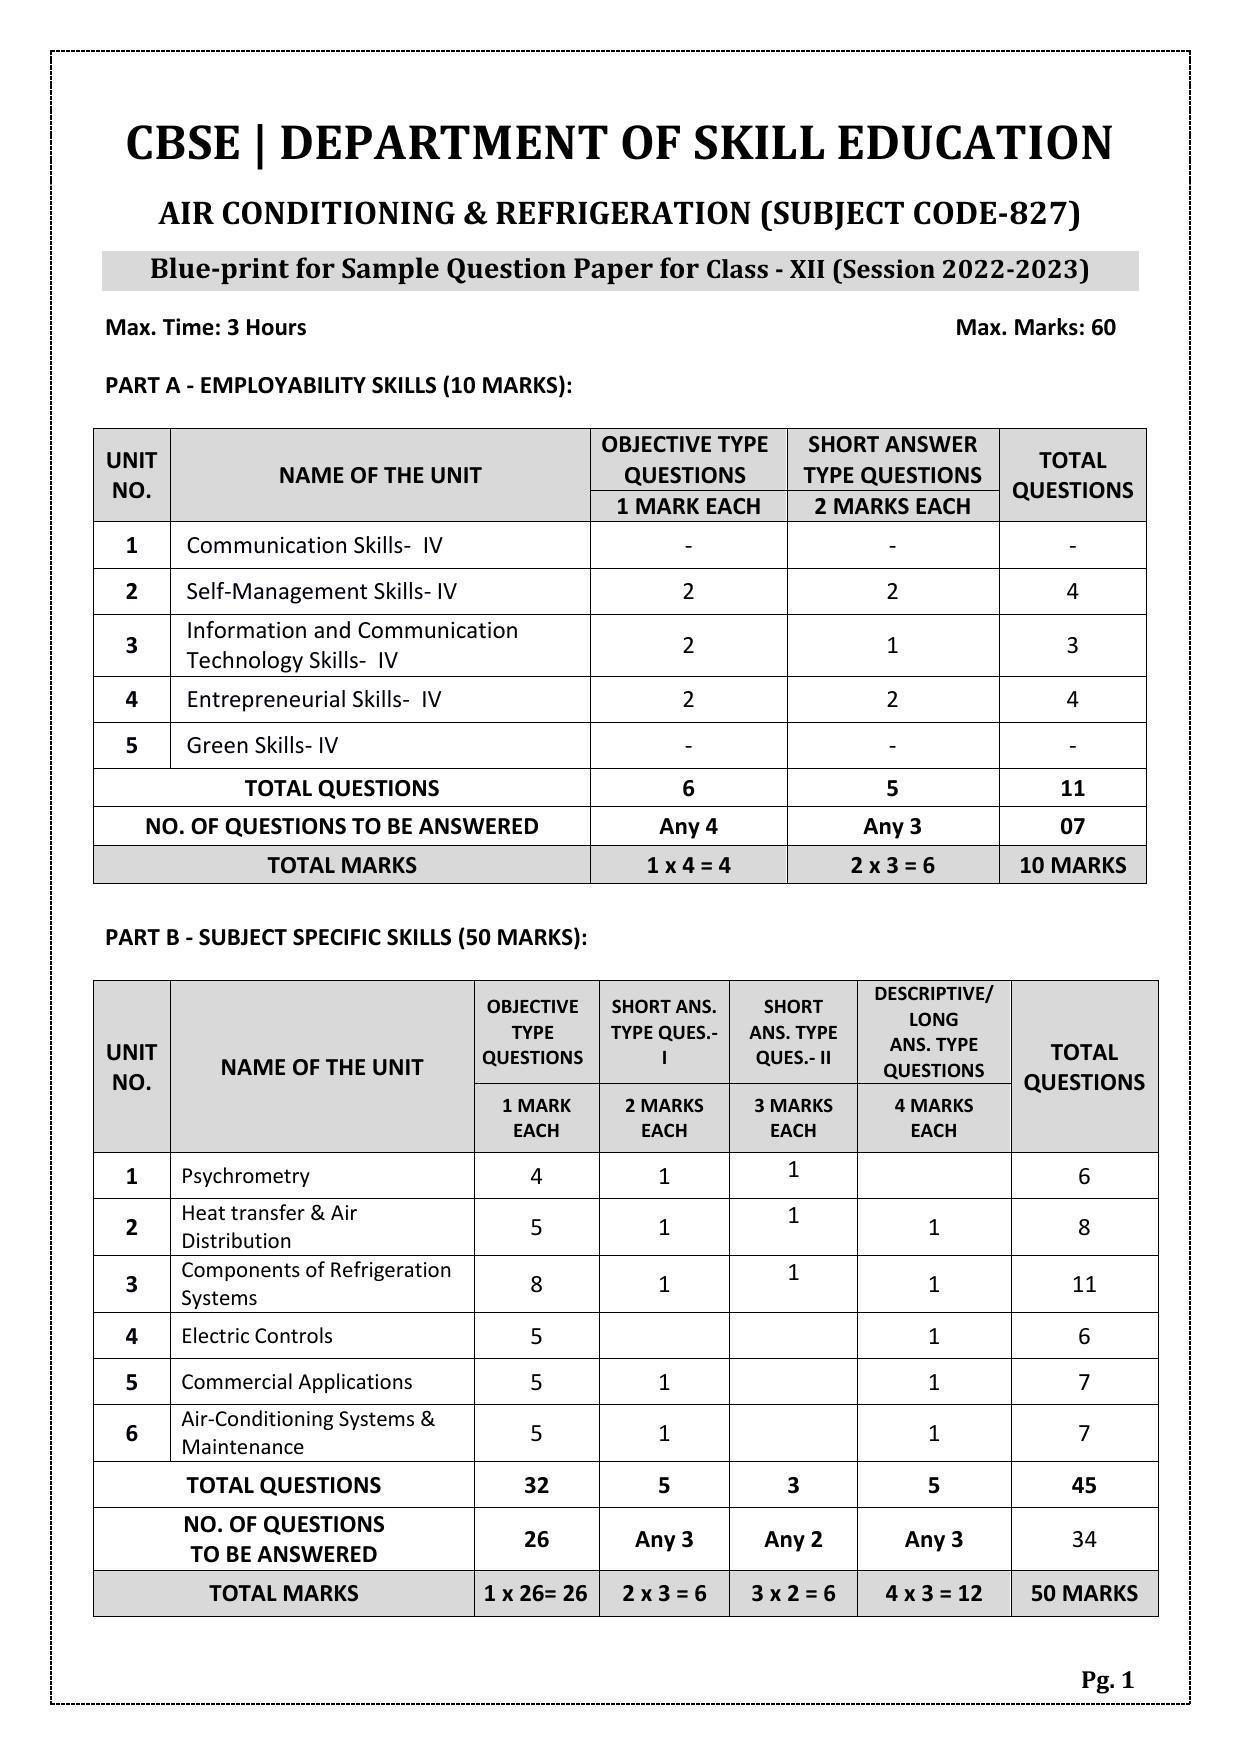 CBSE Class 12 Air-Conditioning & Refrigeration (Skill Education) Sample Papers 2023 - Page 1